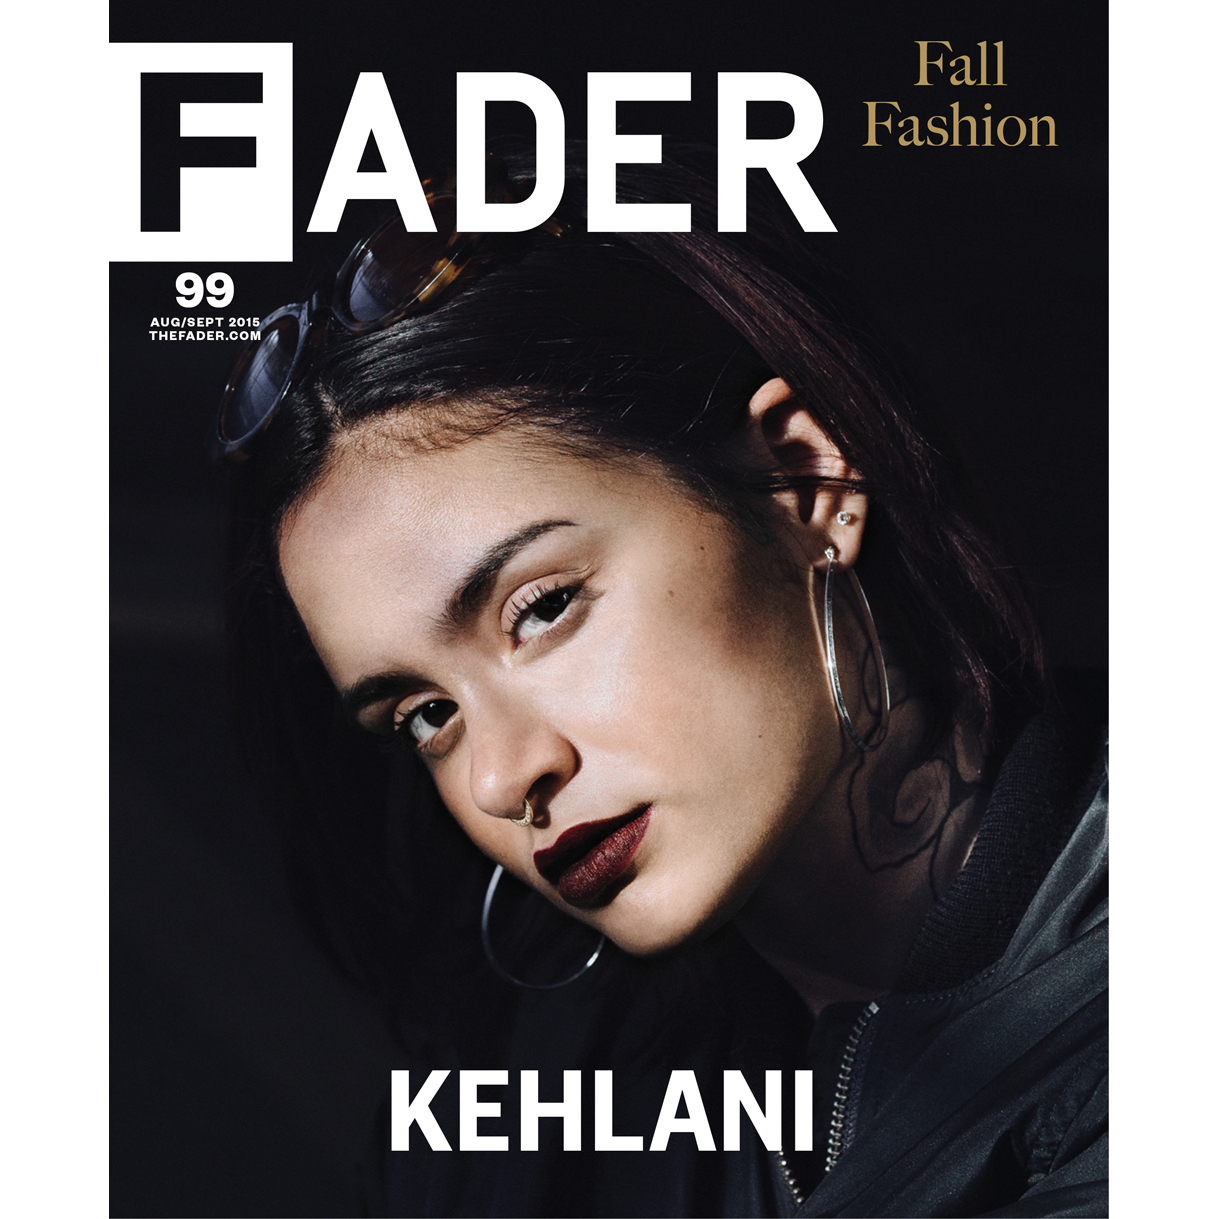 Kehlani Is On “The FADER” Fall Fashion Issue